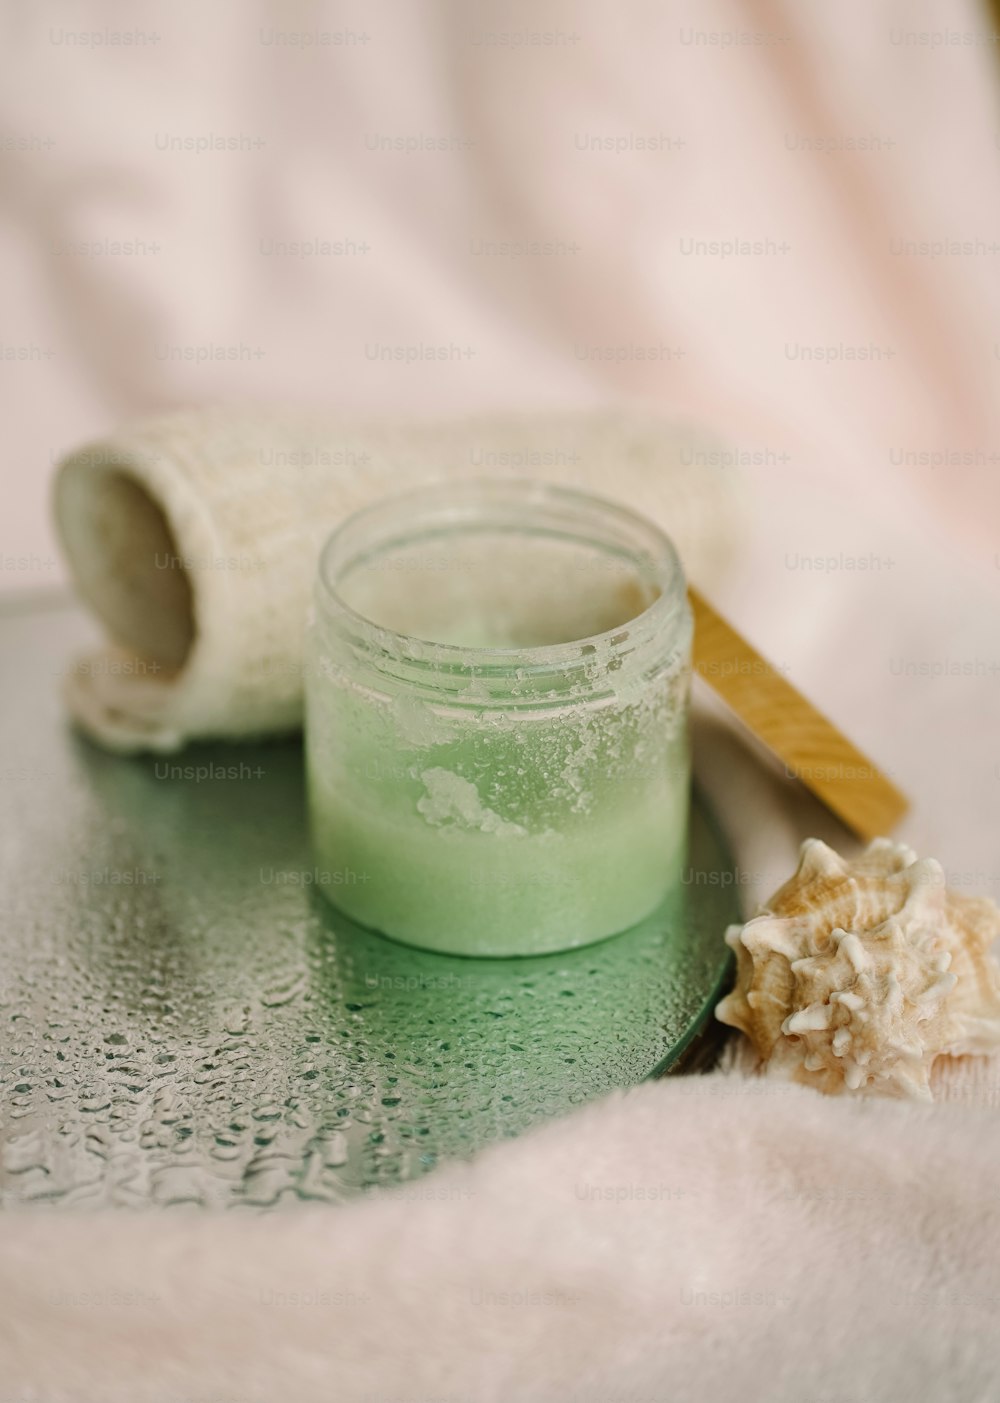 a jar of green liquid next to a wooden brush